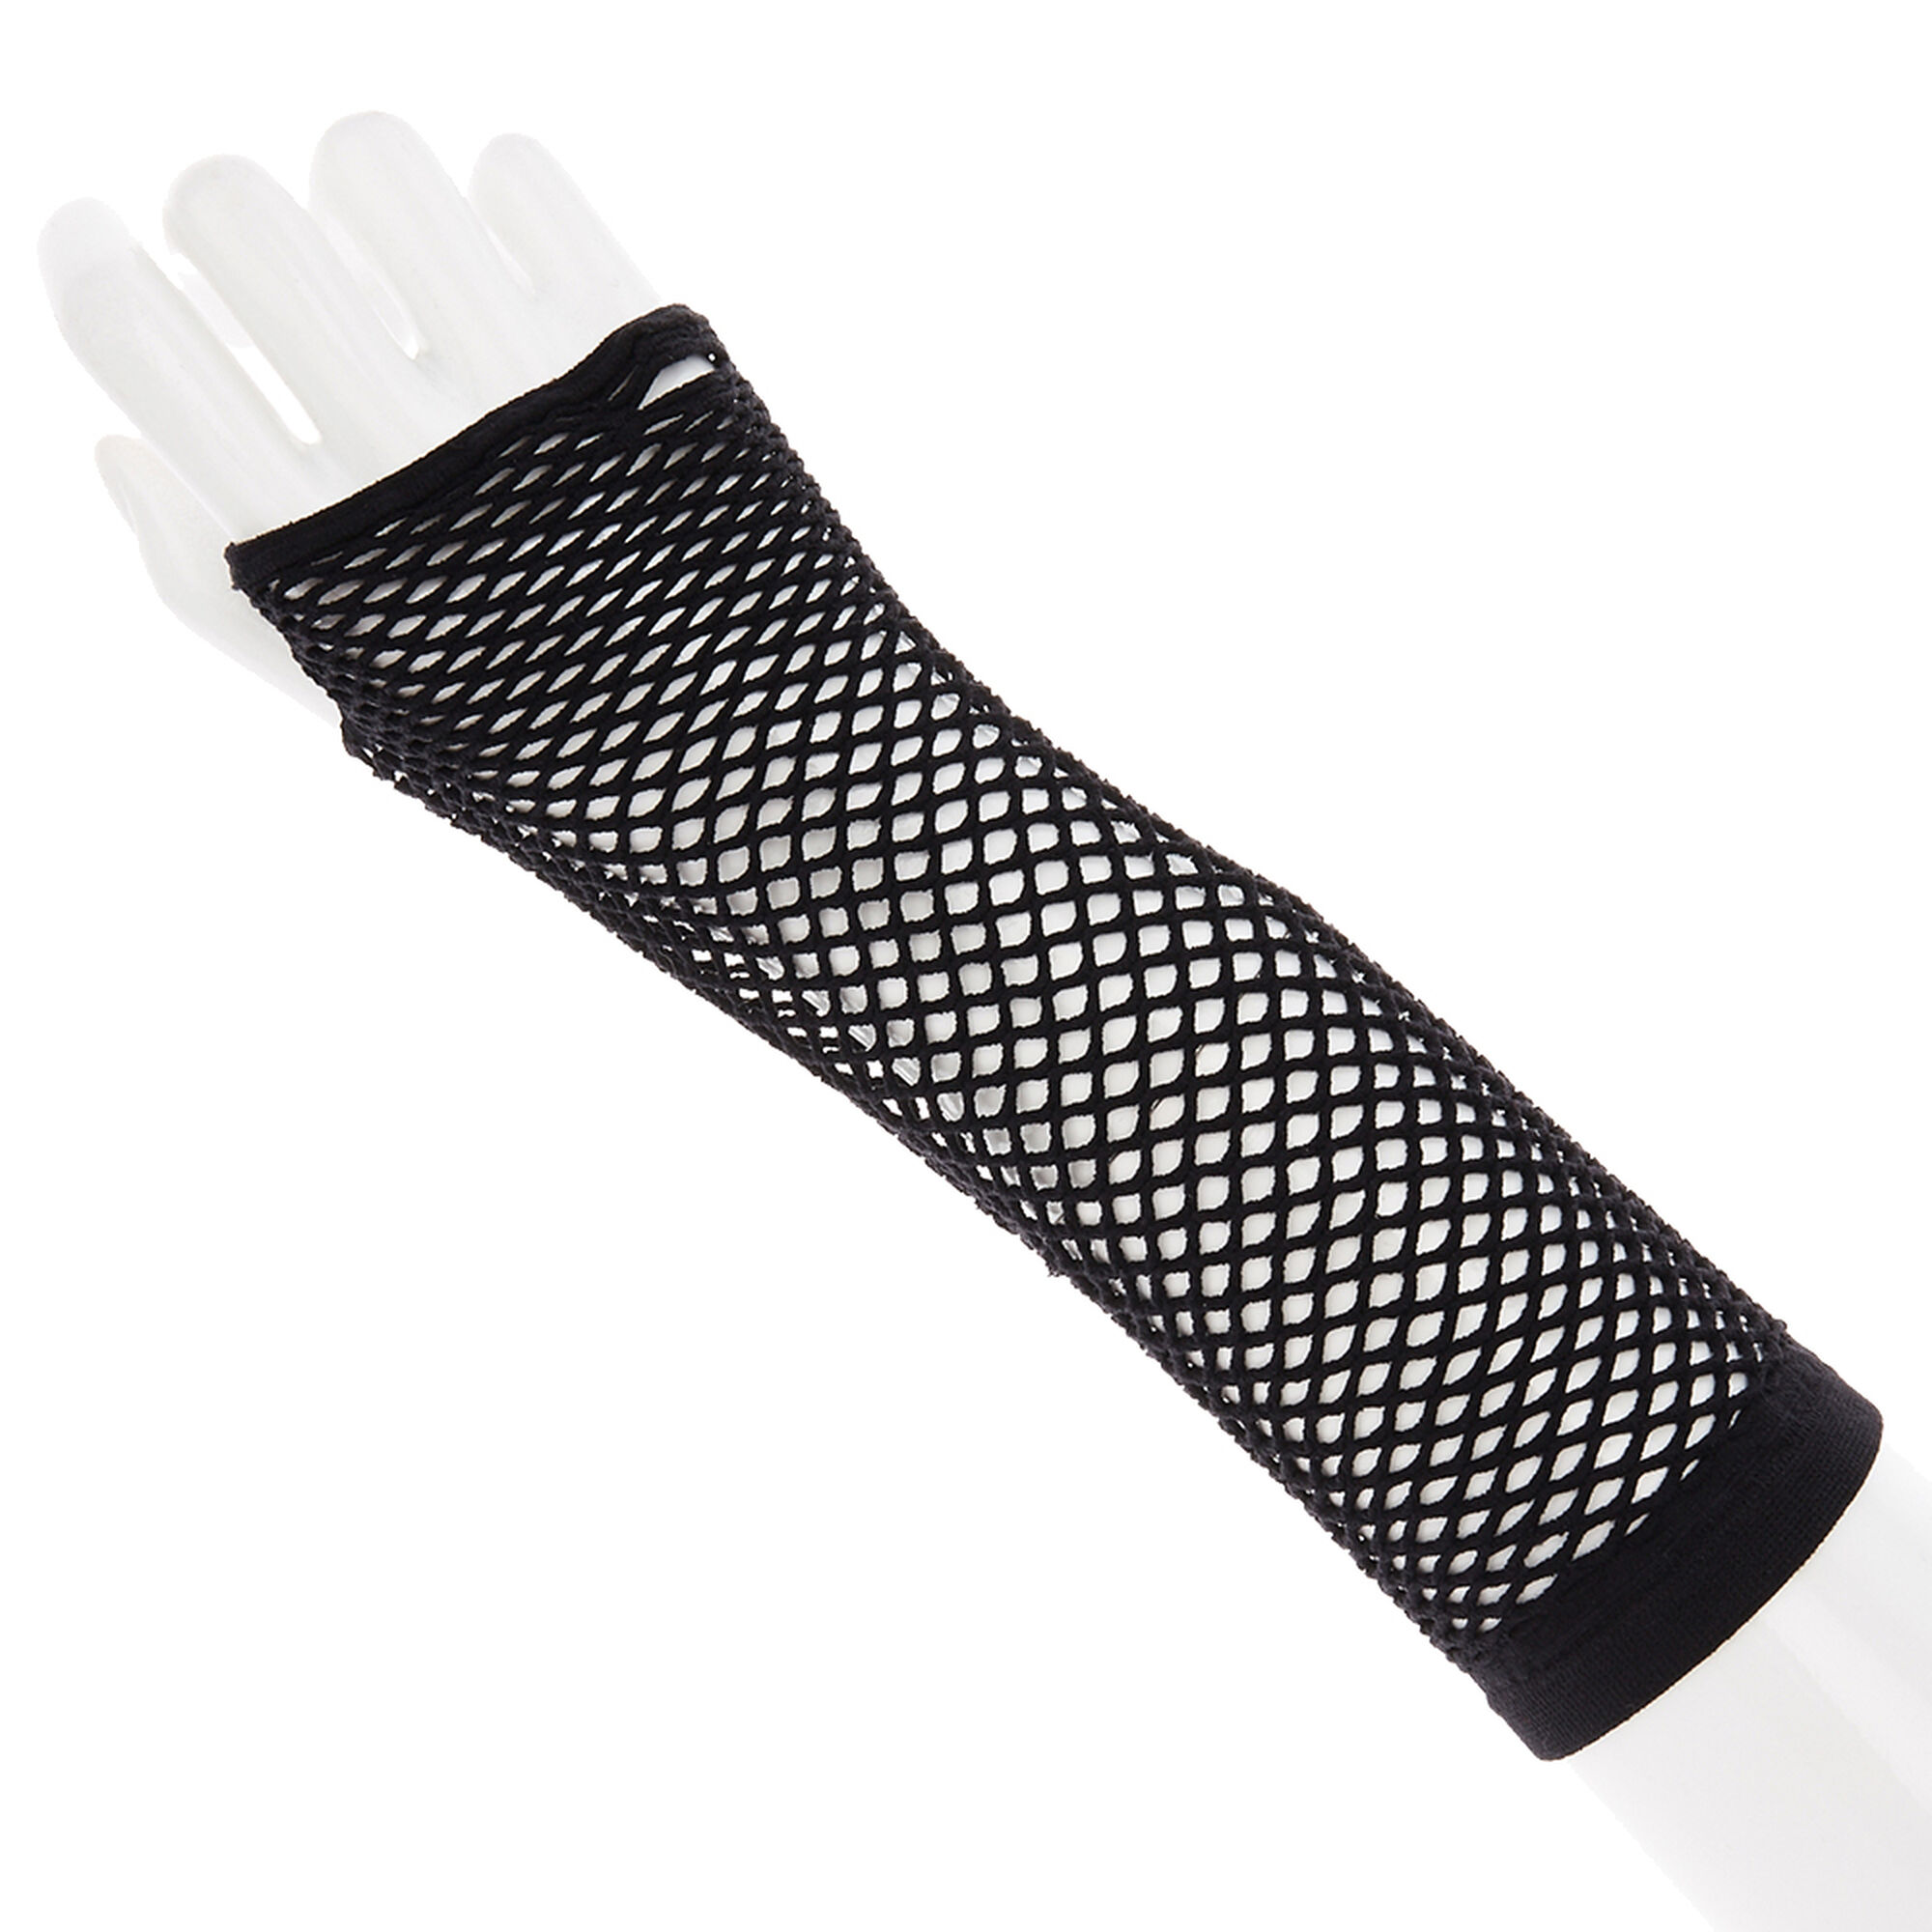 View Claires Fishnet Mesh Arm Warmers Black information